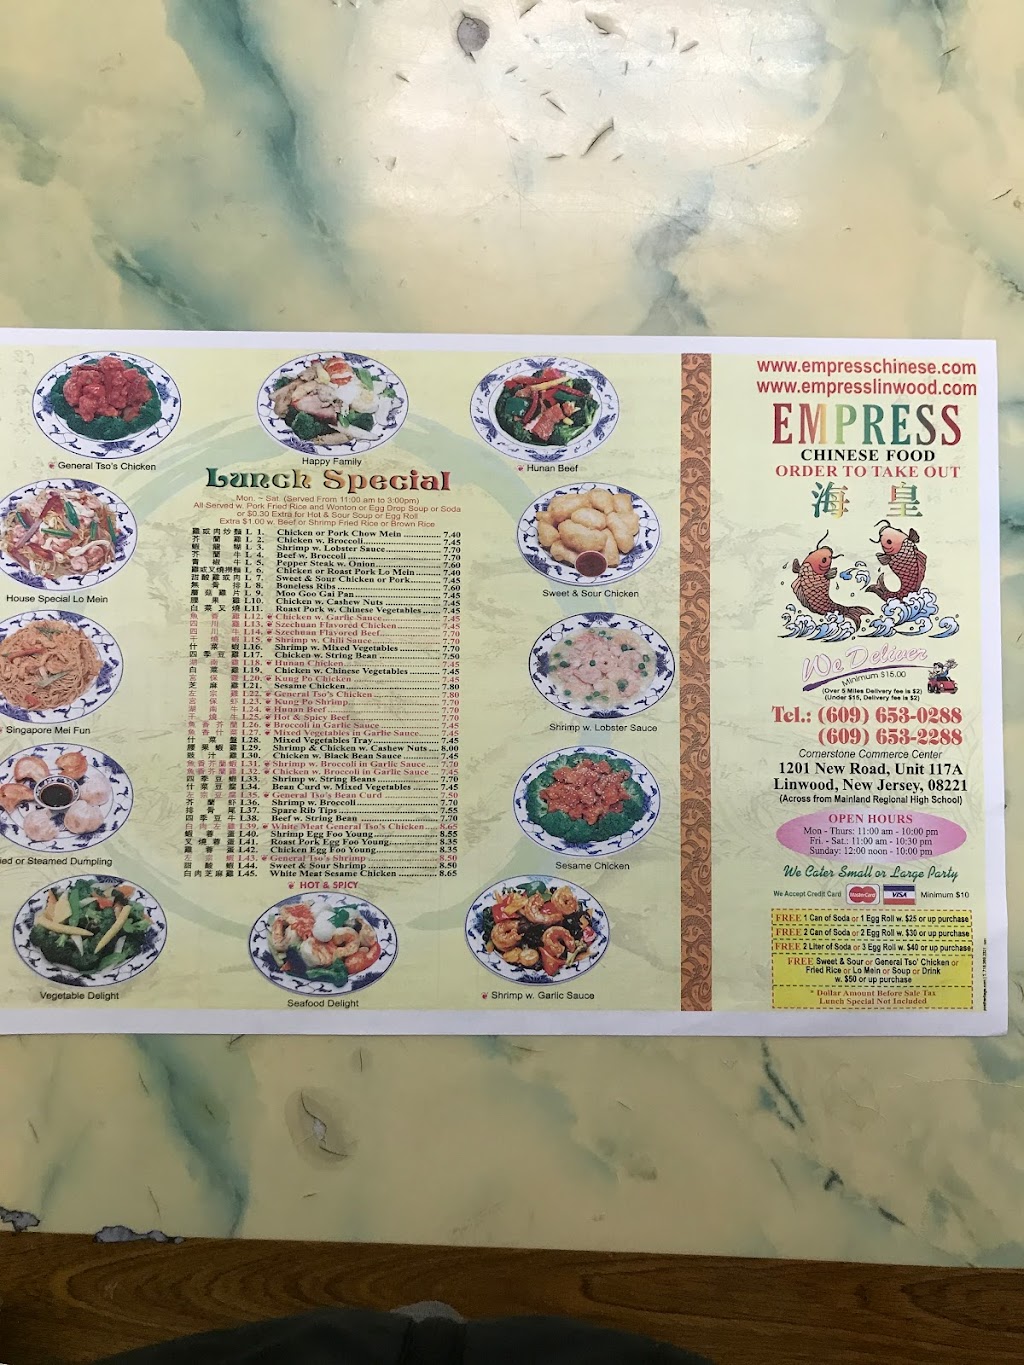 Empress Chinese Restaurant | 117A, 1152, 1201 New Rd, Linwood, NJ 08221 | Phone: (609) 653-0288